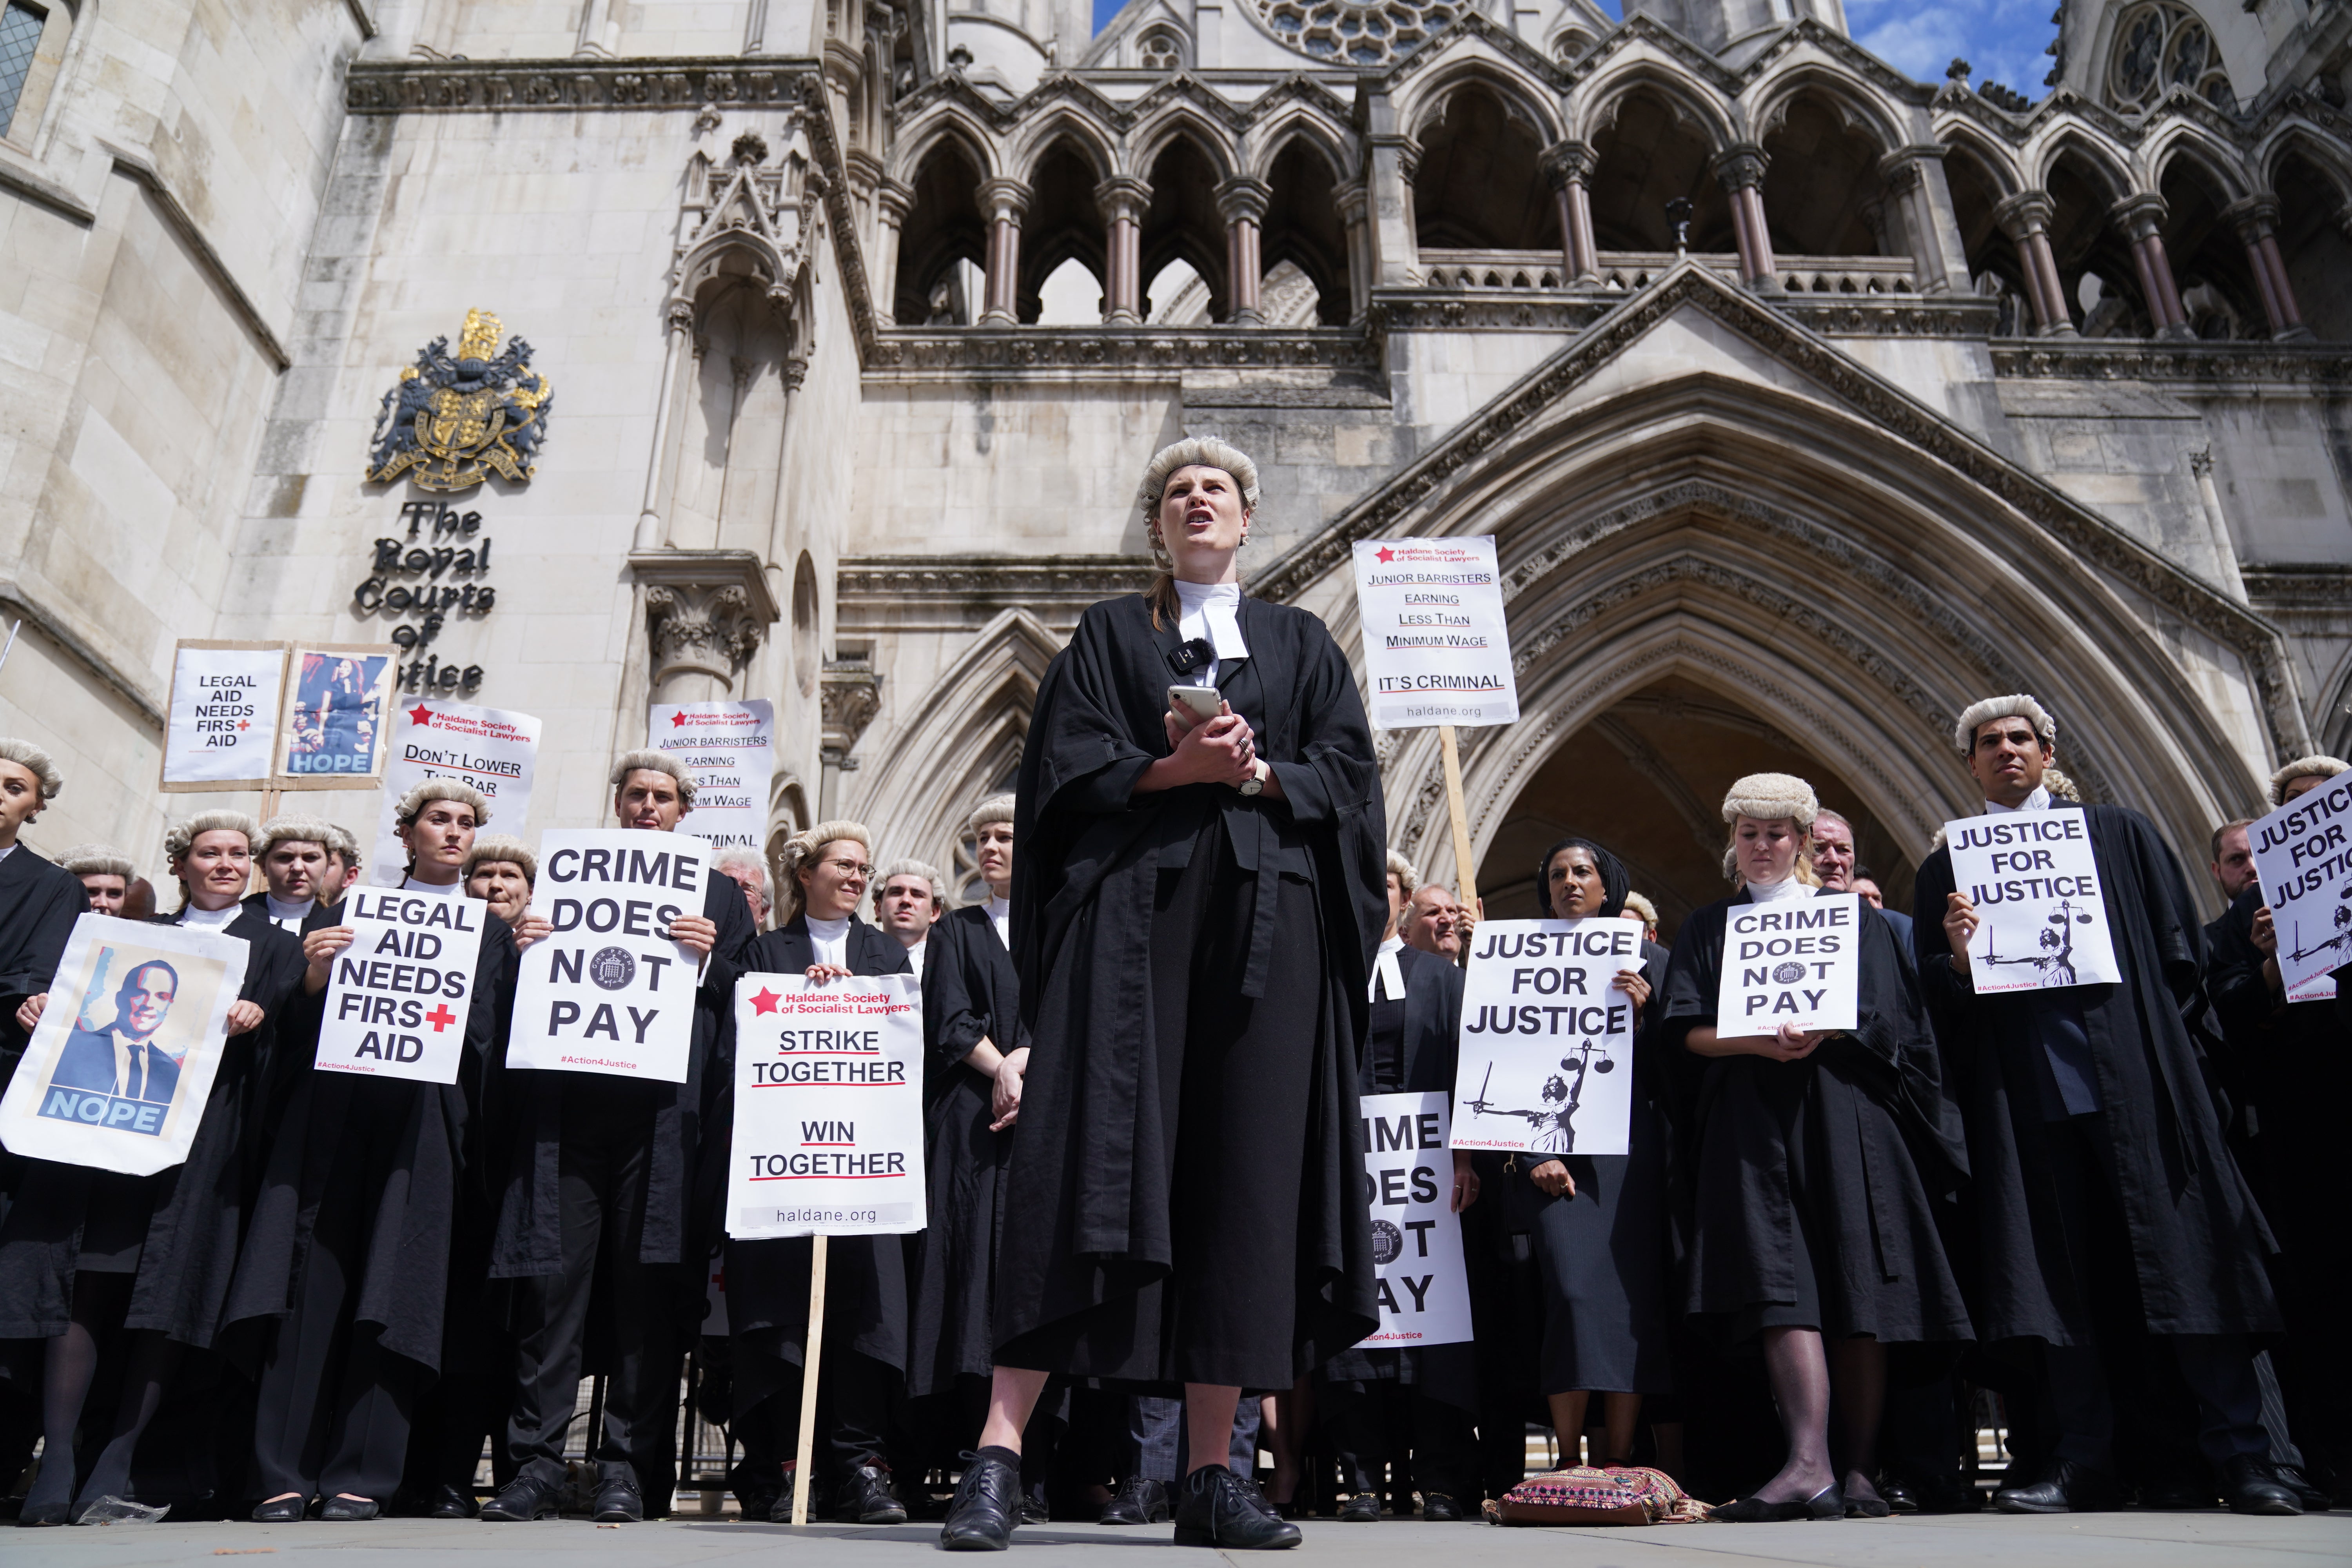 A junior barrister speaks to other criminal defence barristers as they gather outside the Royal Courts of Justice in London (Kirsty O’Connor/PA)